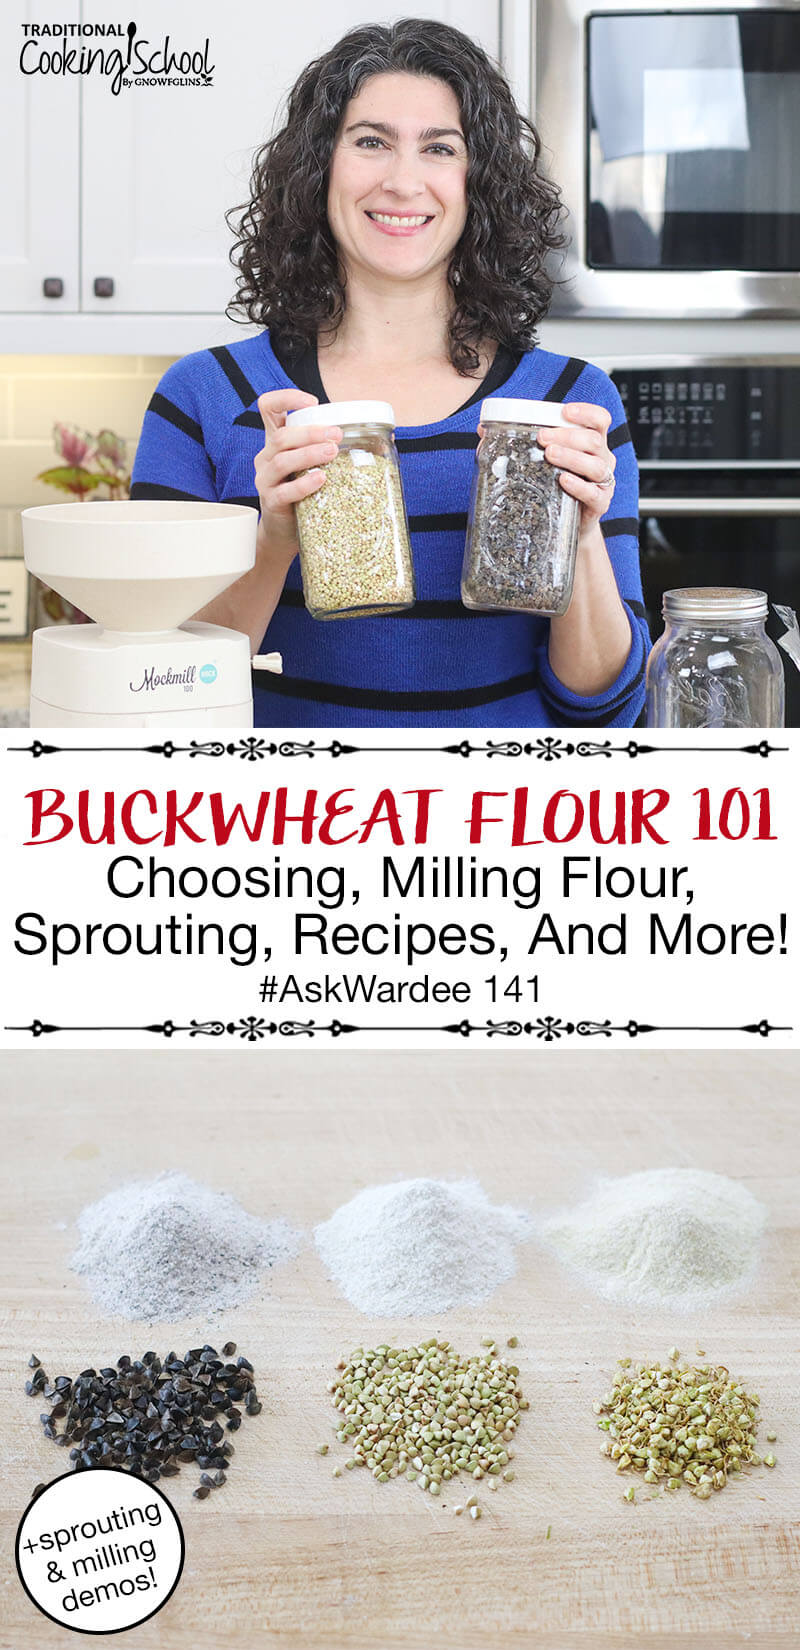 photo collage of smiling woman holding jars of buckwheat in her kitchen, and an array of buckwheat groats and flour on a wooden surface, with text overlay: "Buckwheat Flour 101: Choosing, Milling Flour, Sprouting, Recipes & More! #AskWardee 141 (+sprouting & milling demos!)"